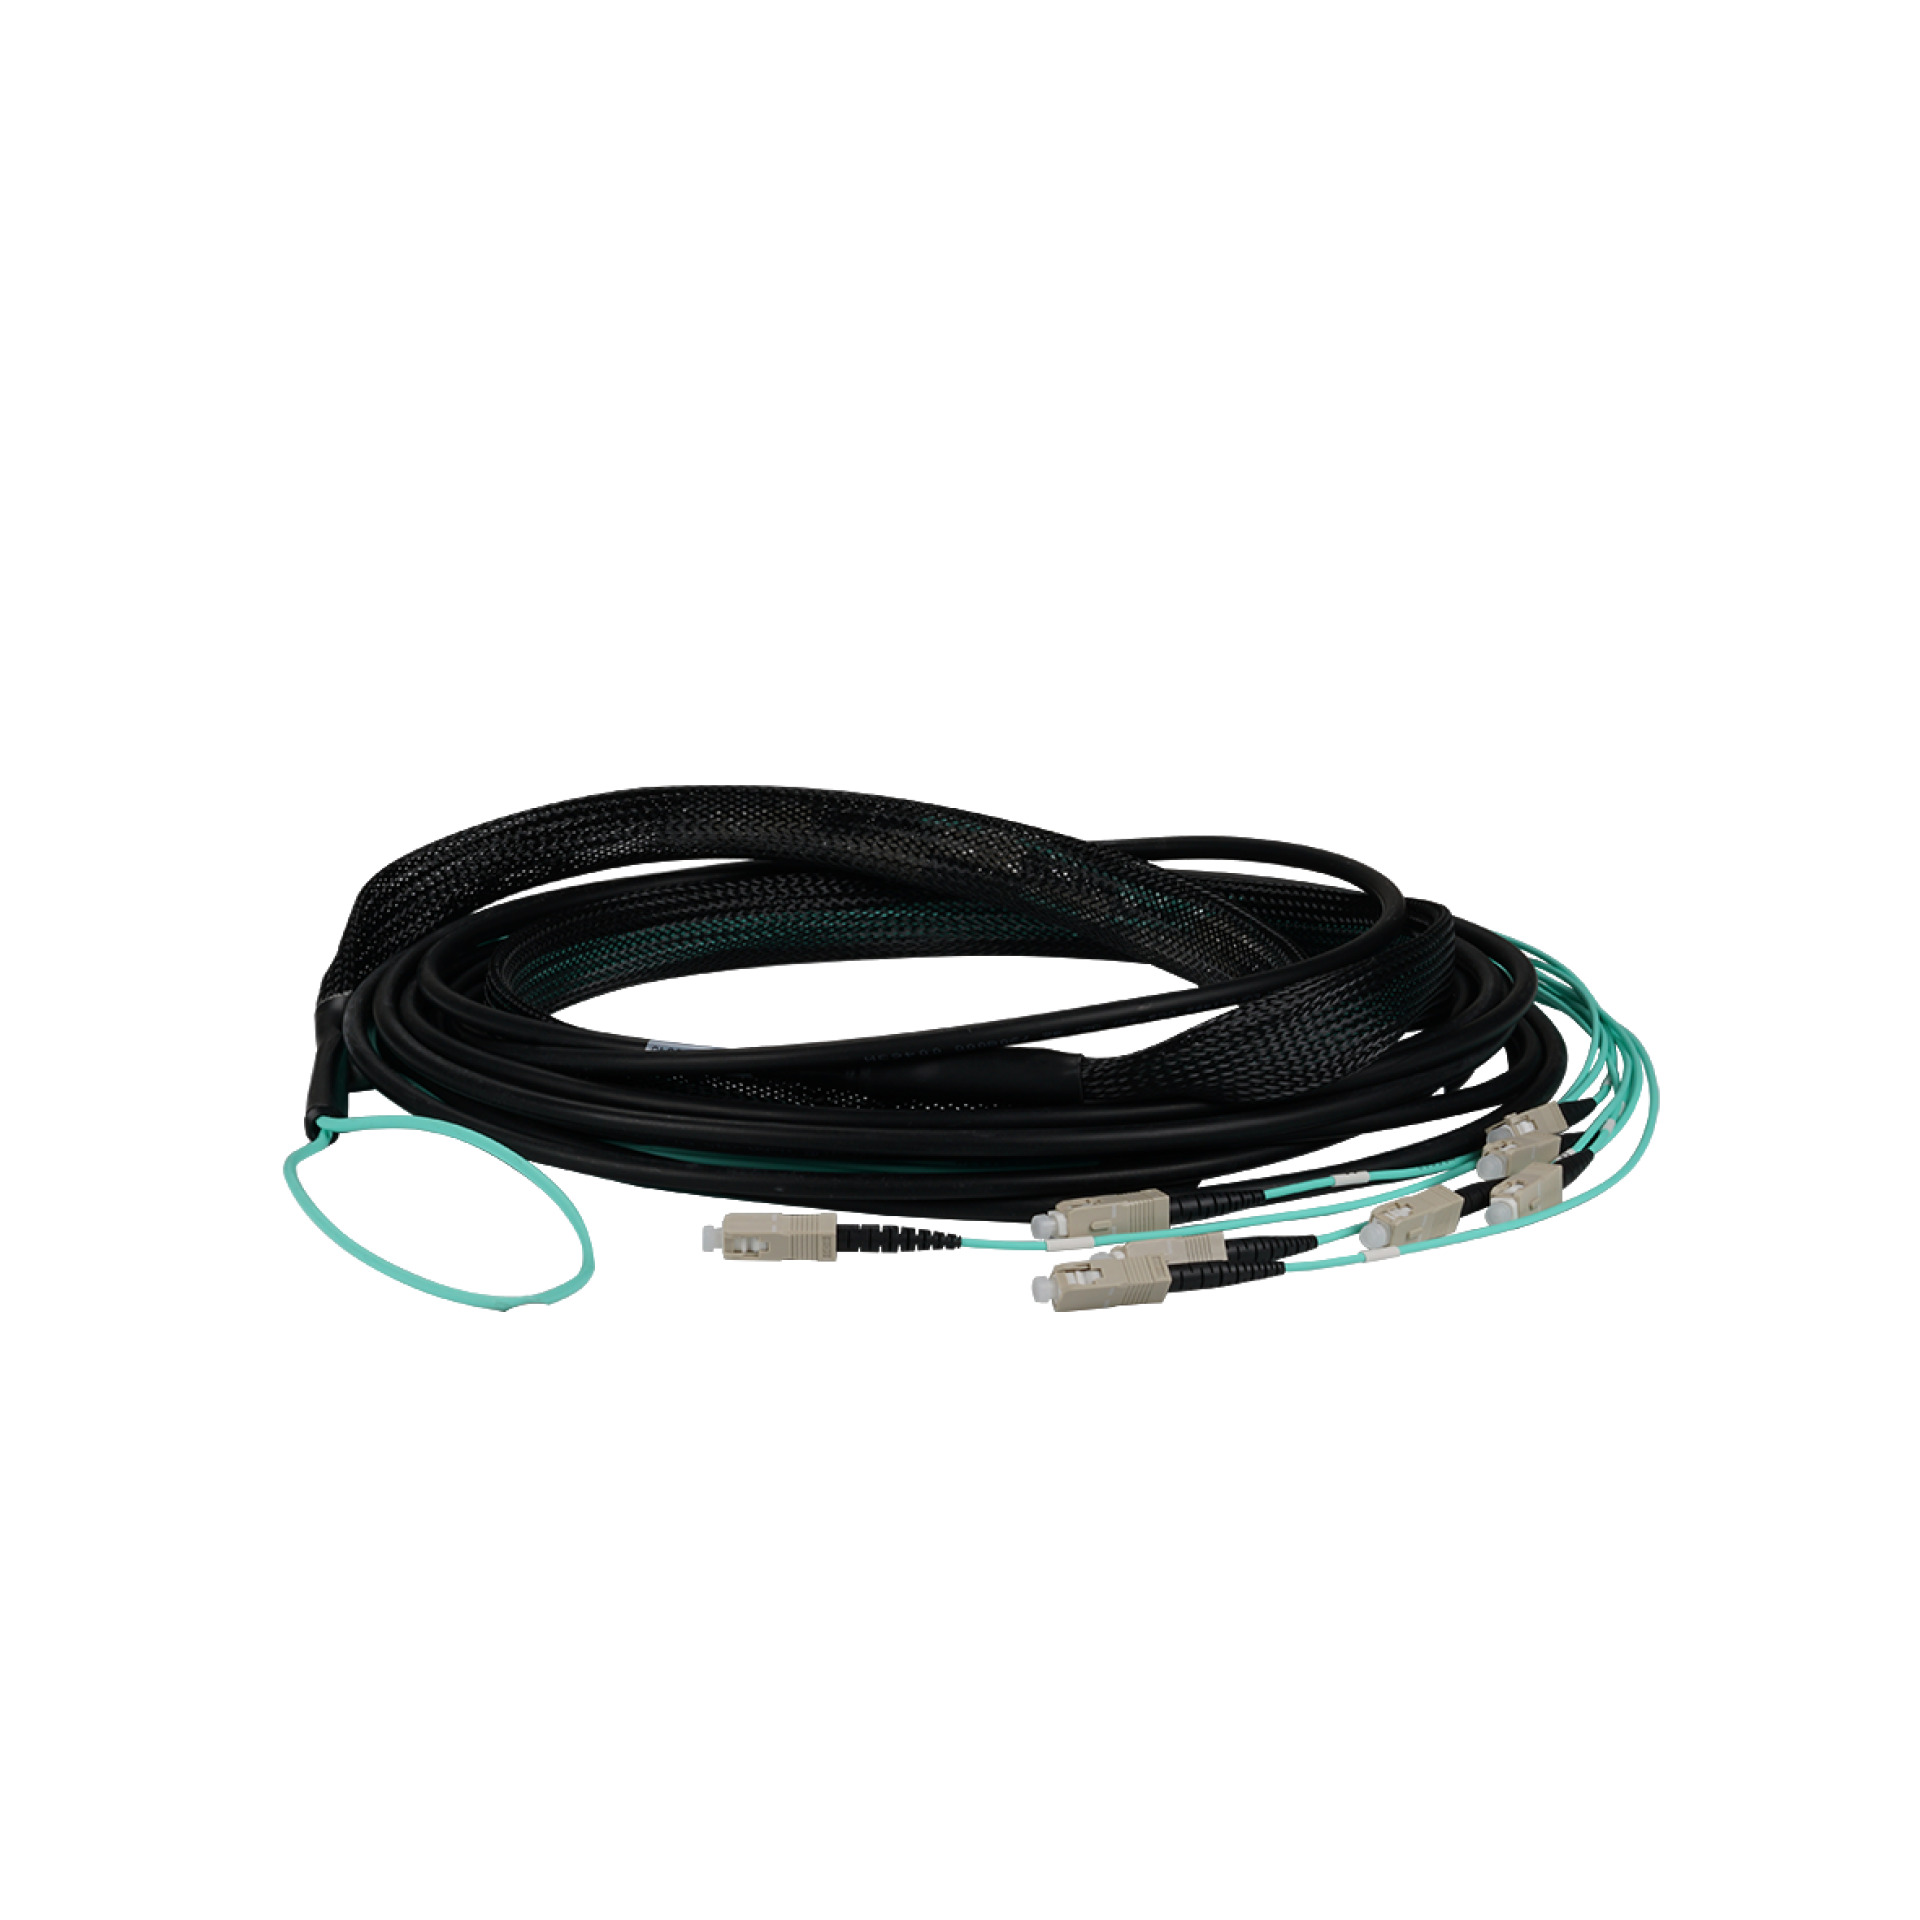 Trunk cable U-DQ(ZN)BH 4G 50/125, SC/SC OM3 10m